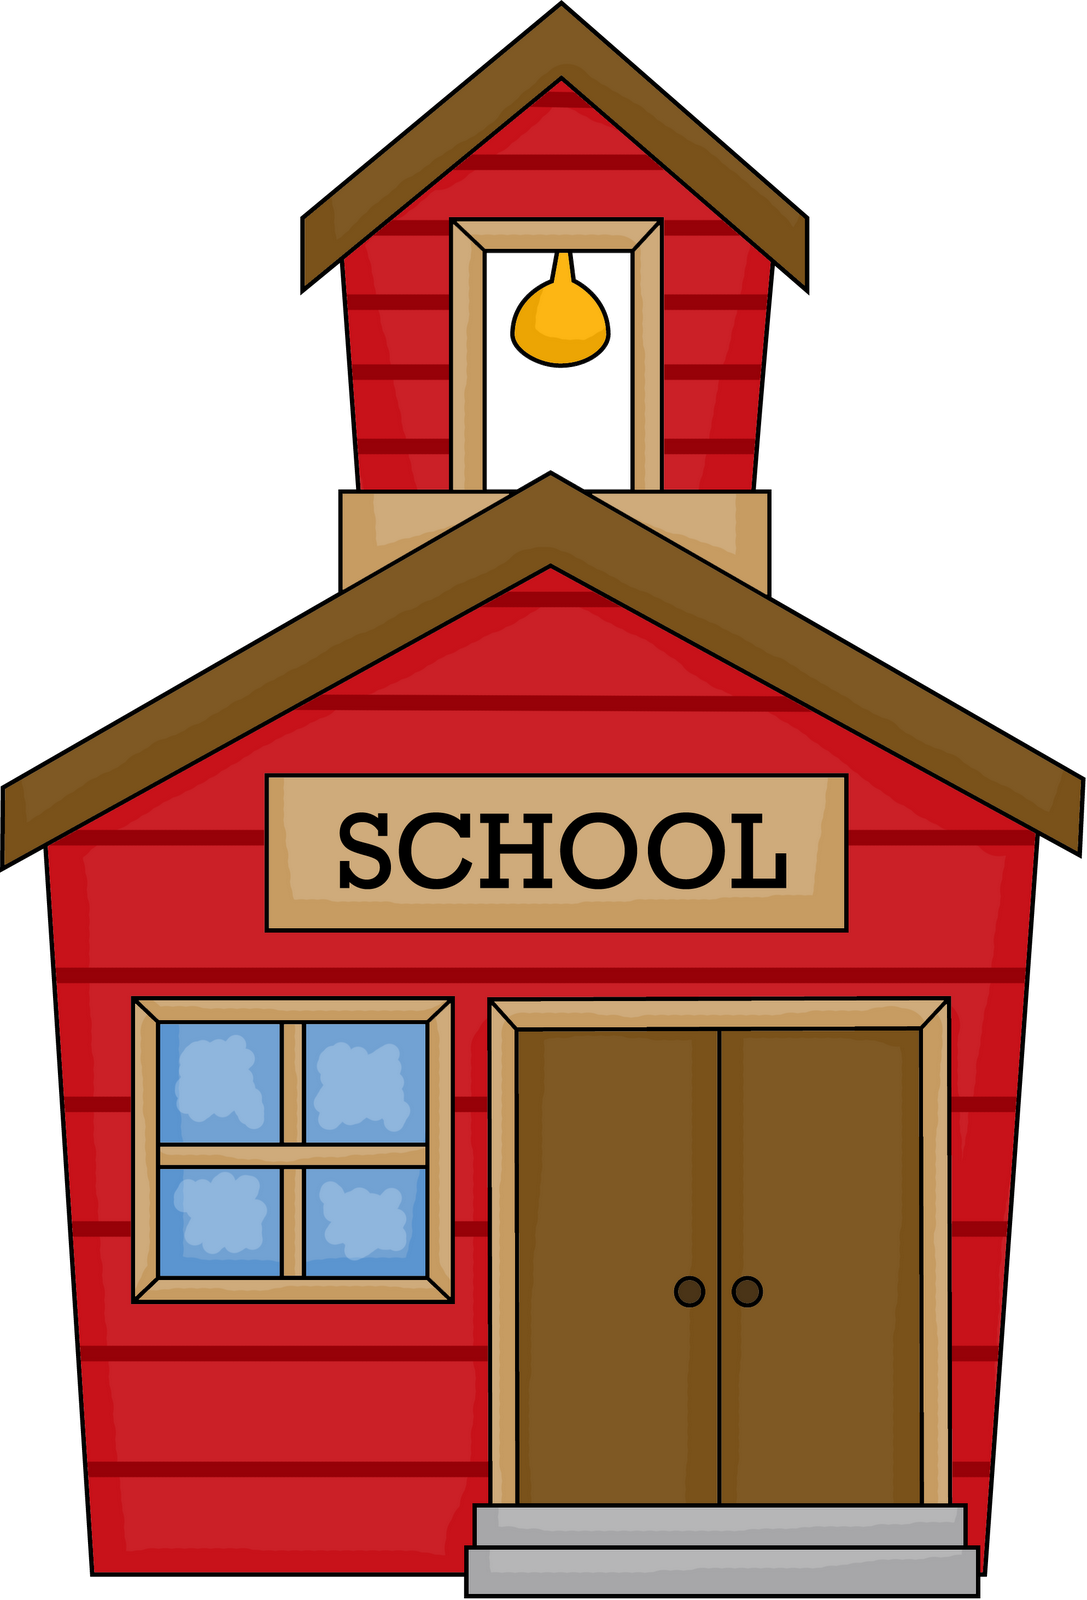 free clipart images school house - photo #11